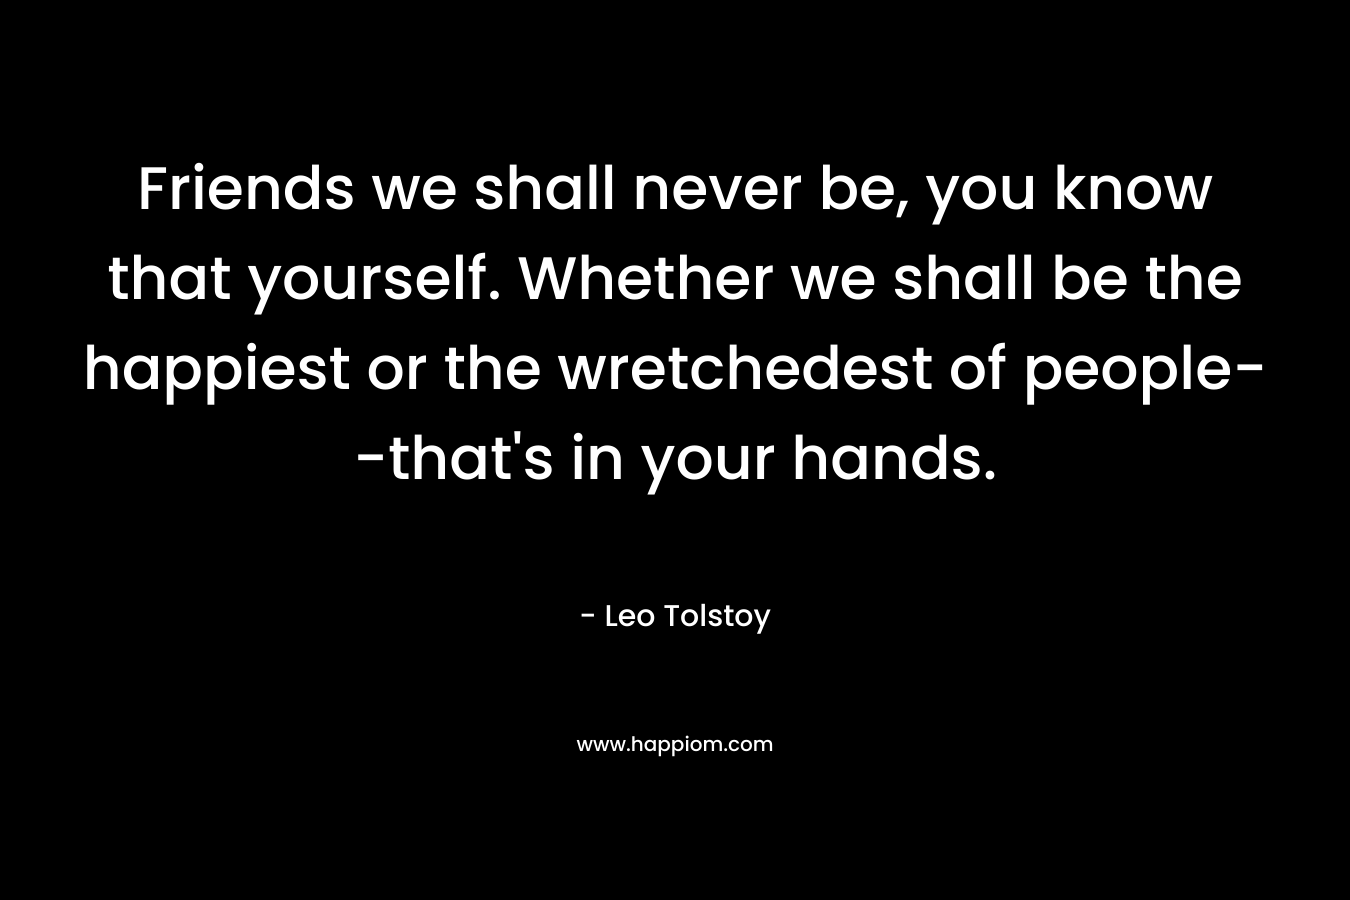 Friends we shall never be, you know that yourself. Whether we shall be the happiest or the wretchedest of people–that’s in your hands. – Leo Tolstoy